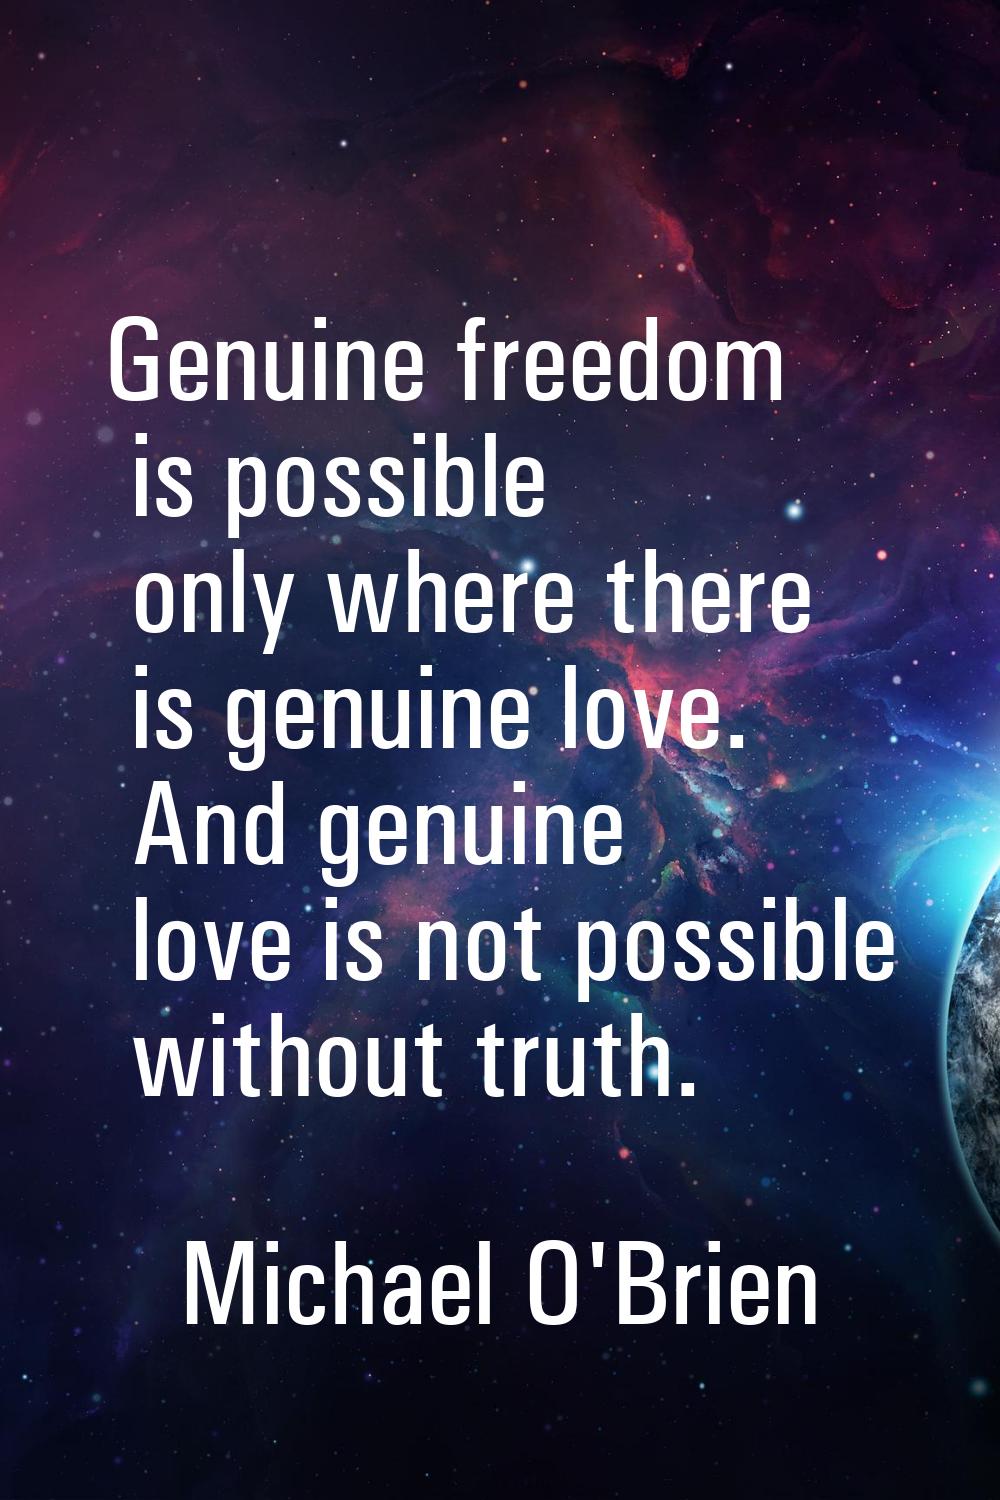 Genuine freedom is possible only where there is genuine love. And genuine love is not possible with